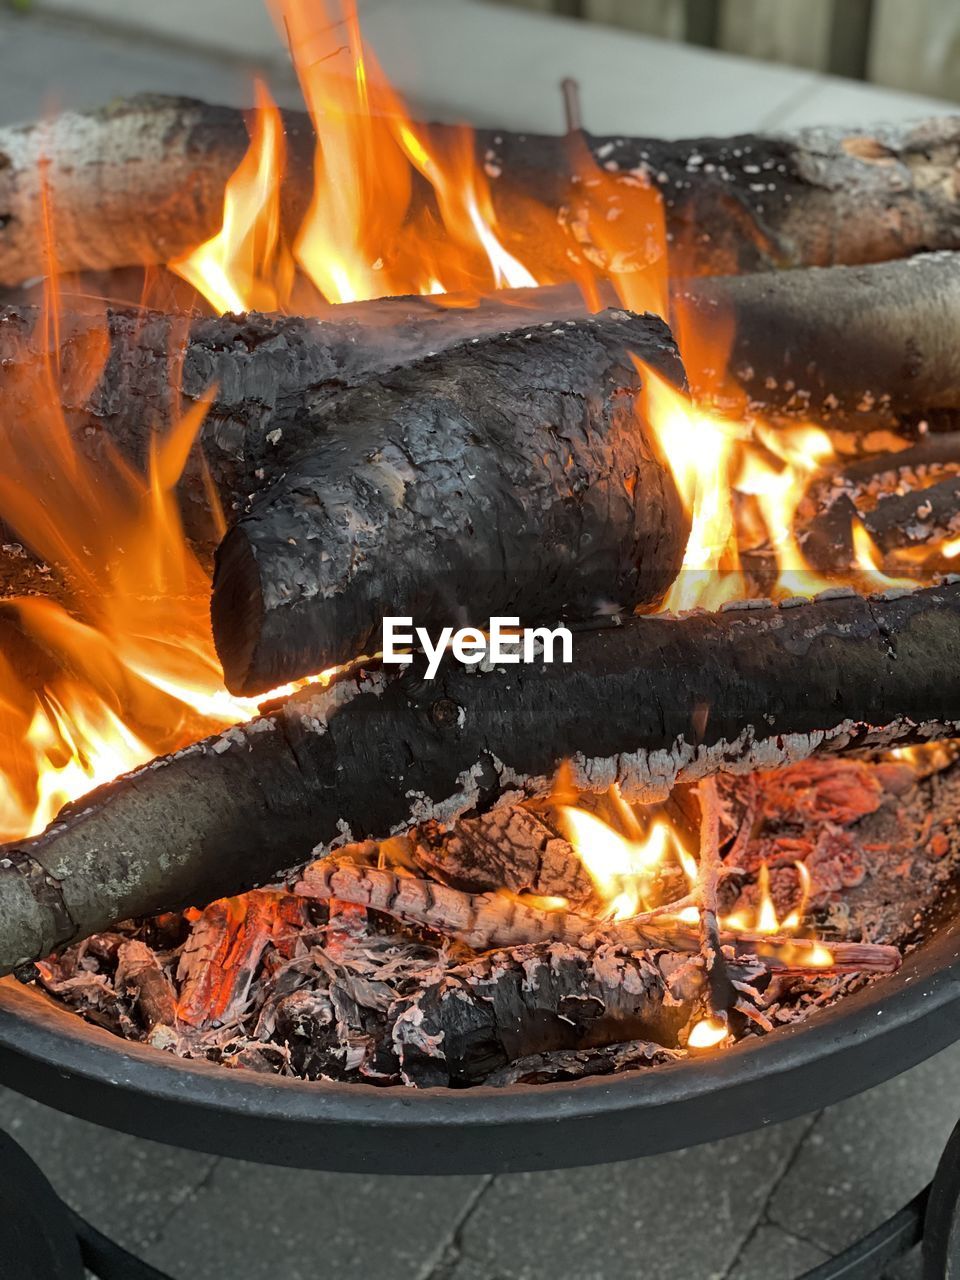 burning, fire, flame, heat, nature, glowing, no people, campfire, food and drink, log, wood, food, orange color, meat, fireplace, firewood, iron, fire pit, coal, close-up, grilling, bonfire, dish, barbecue, outdoors, barbecue grill, motion